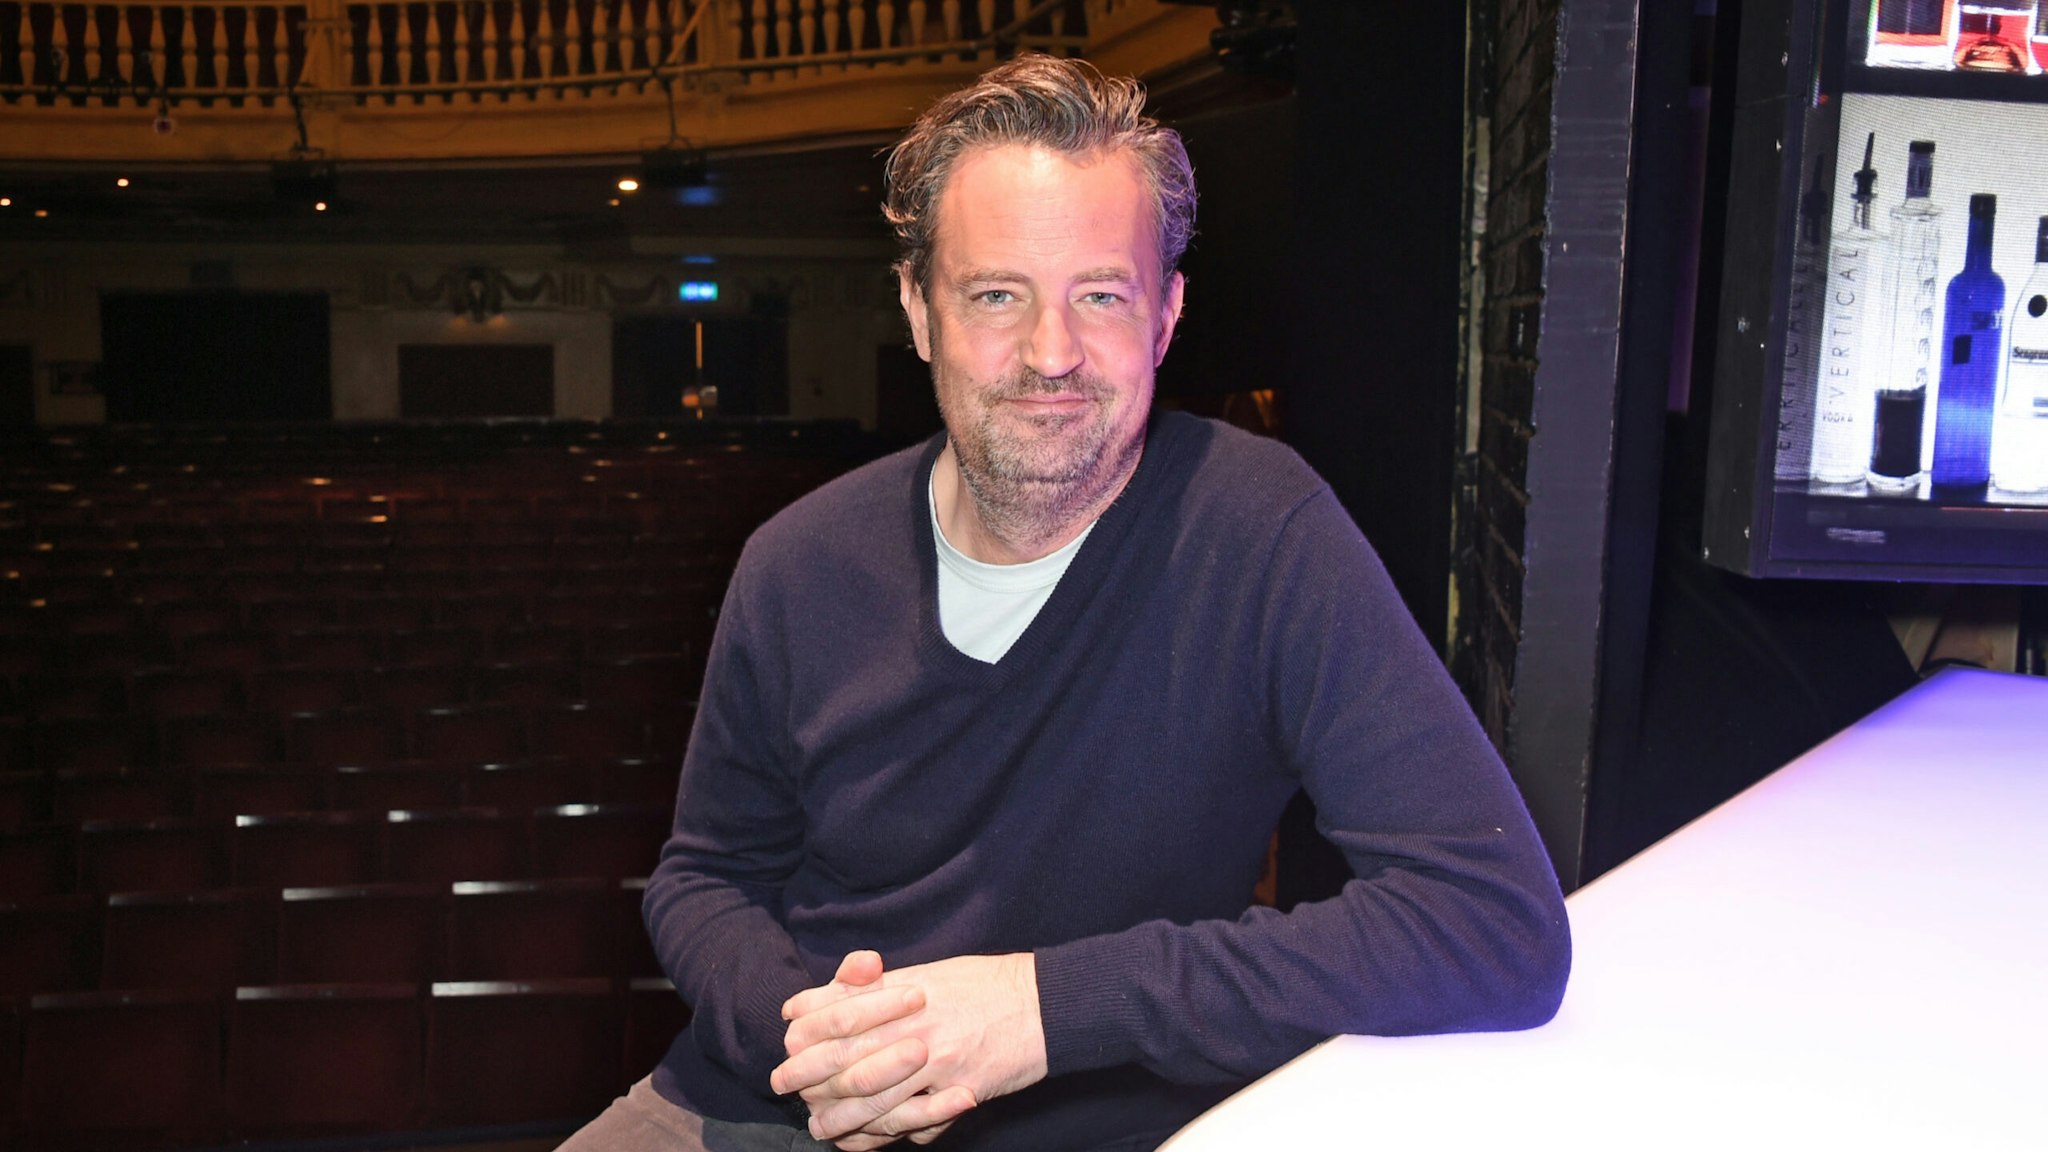 Matthew Perry poses at a photocall for "The End Of Longing", a new play which he wrote and stars in at The Playhouse Theatre, on February 8, 2016 in London, England.